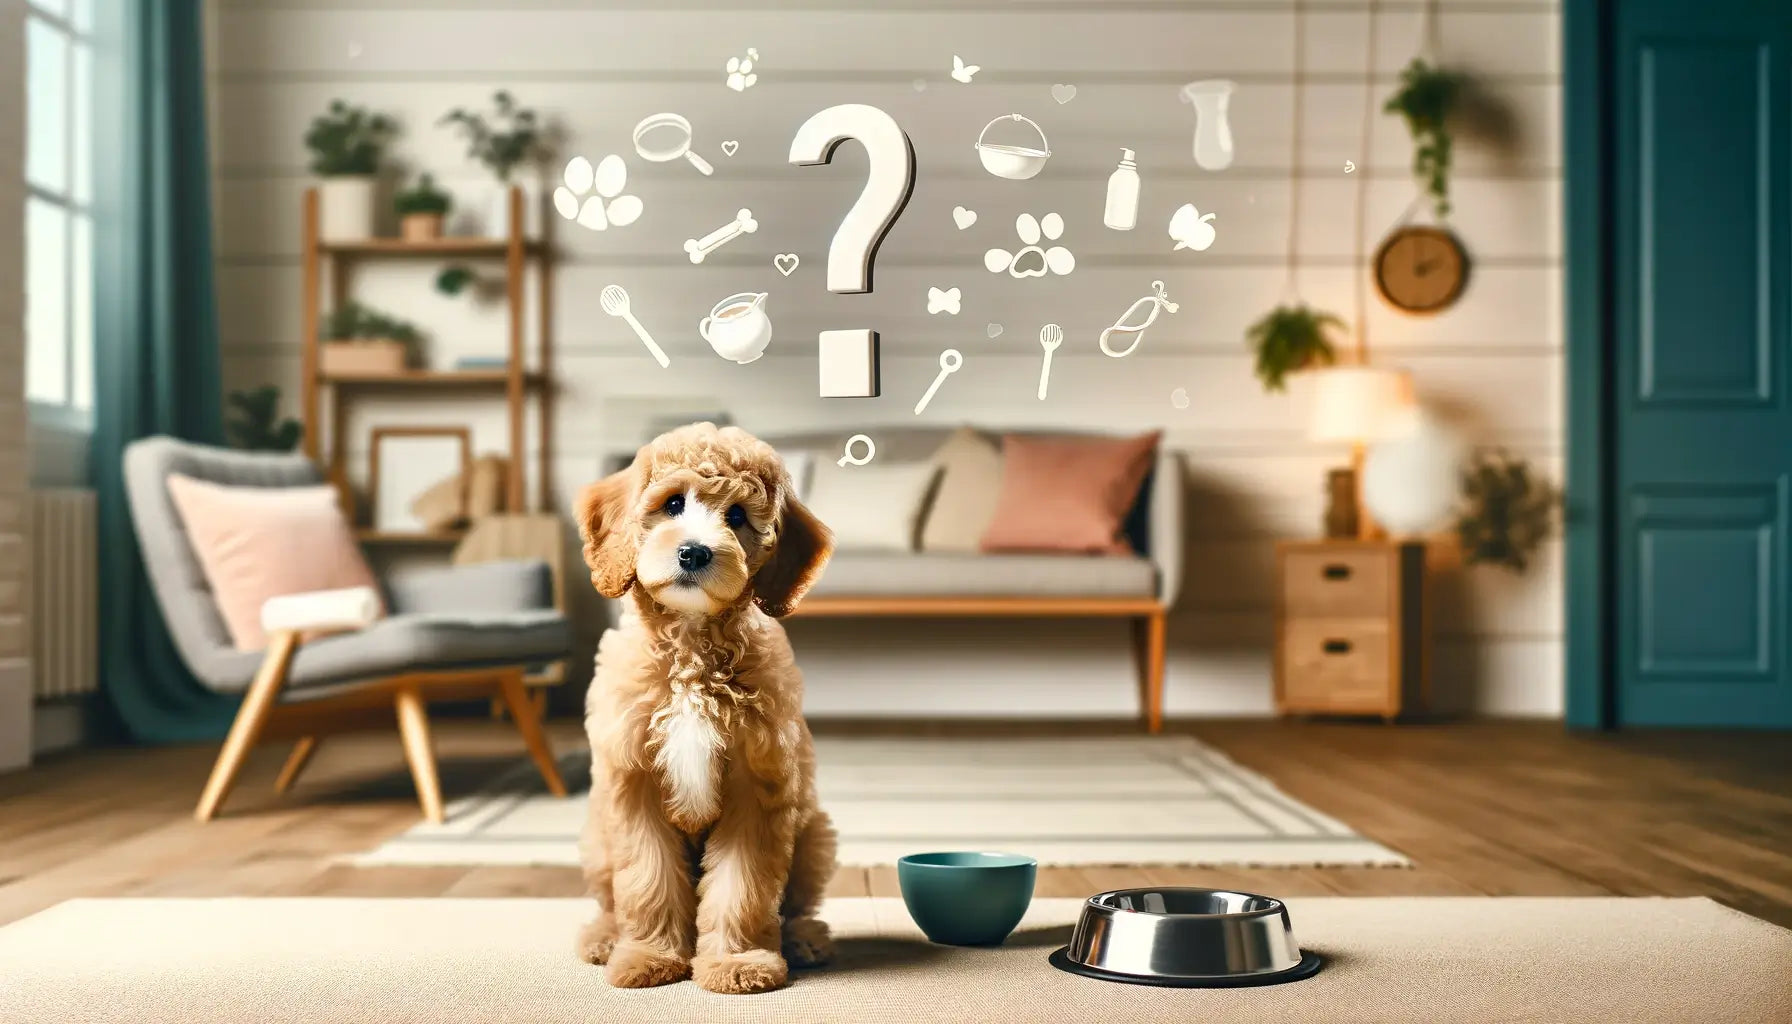 Teacup Goldendoodle sits attentively in a home environment with a large question mark hovering above its head.